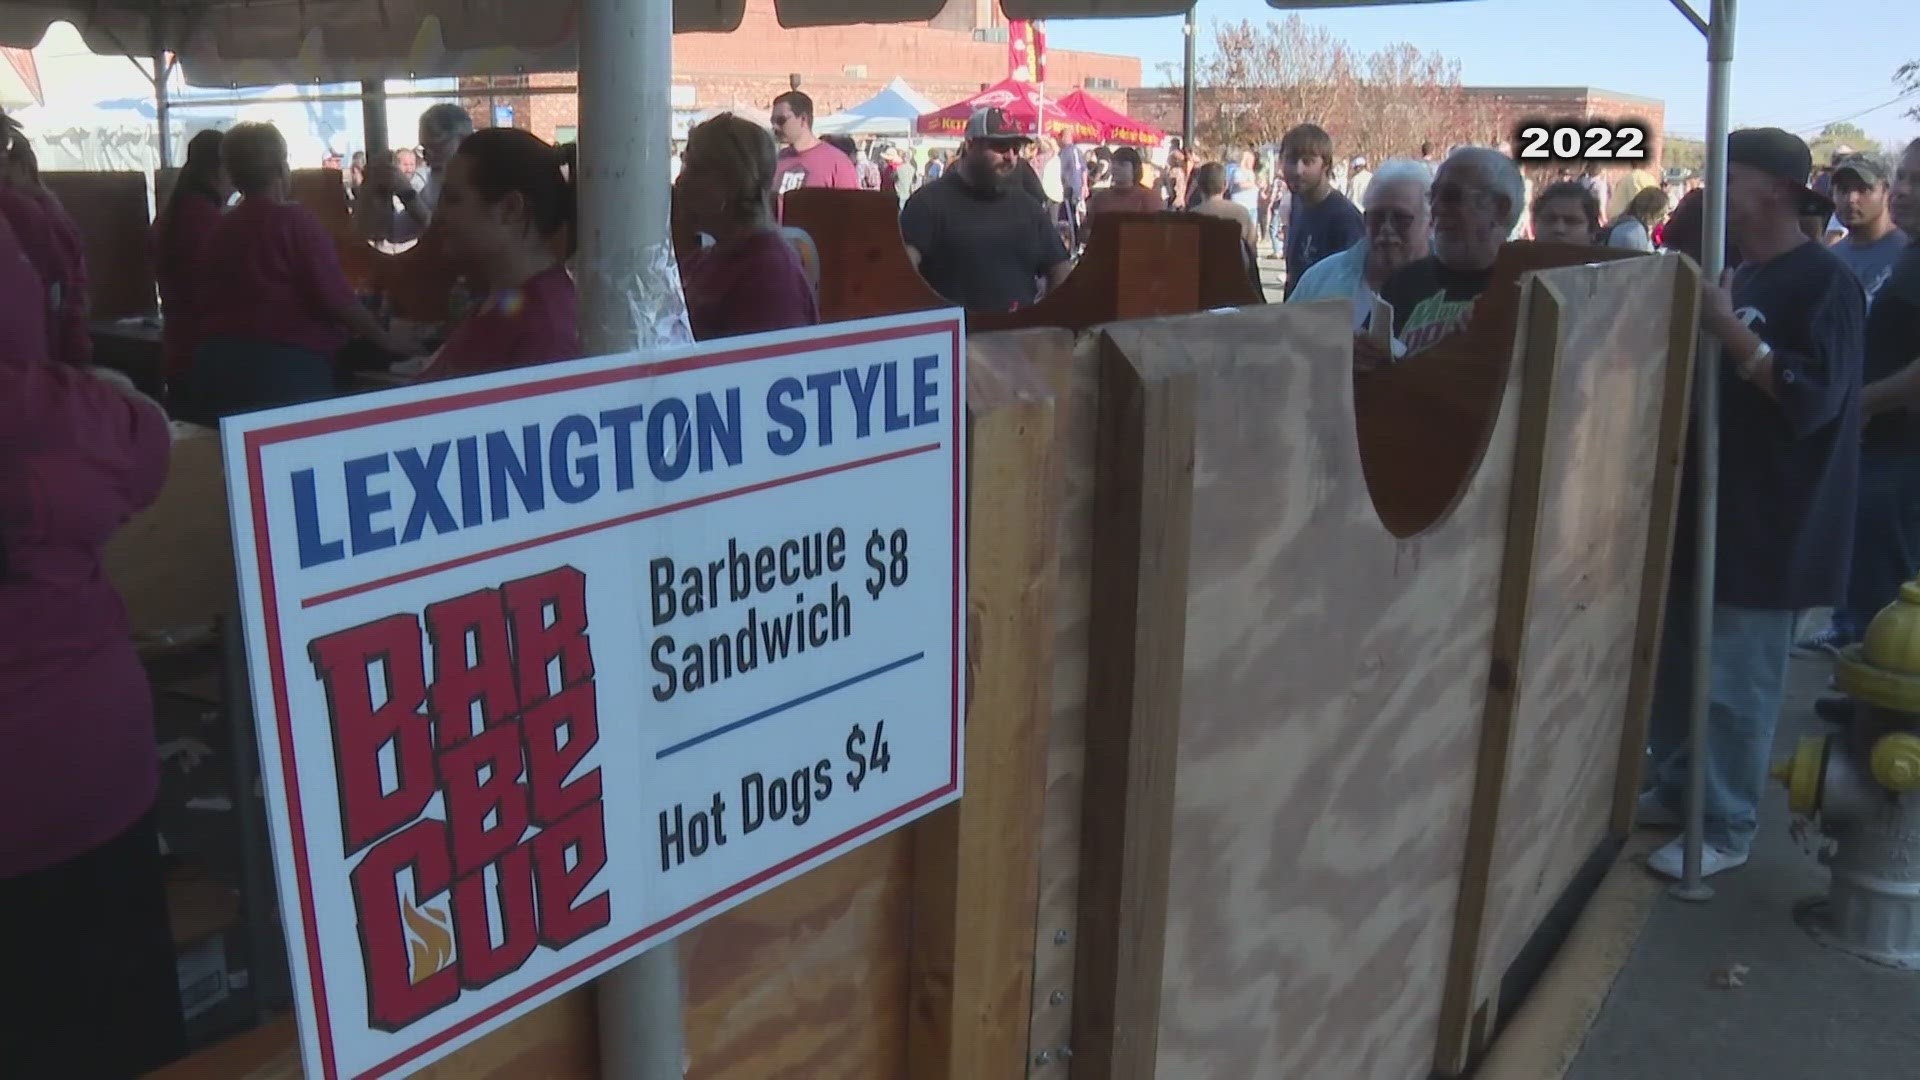 Over 100,000 people are expected at the 39th Annual Lexington Barbecue Festival.